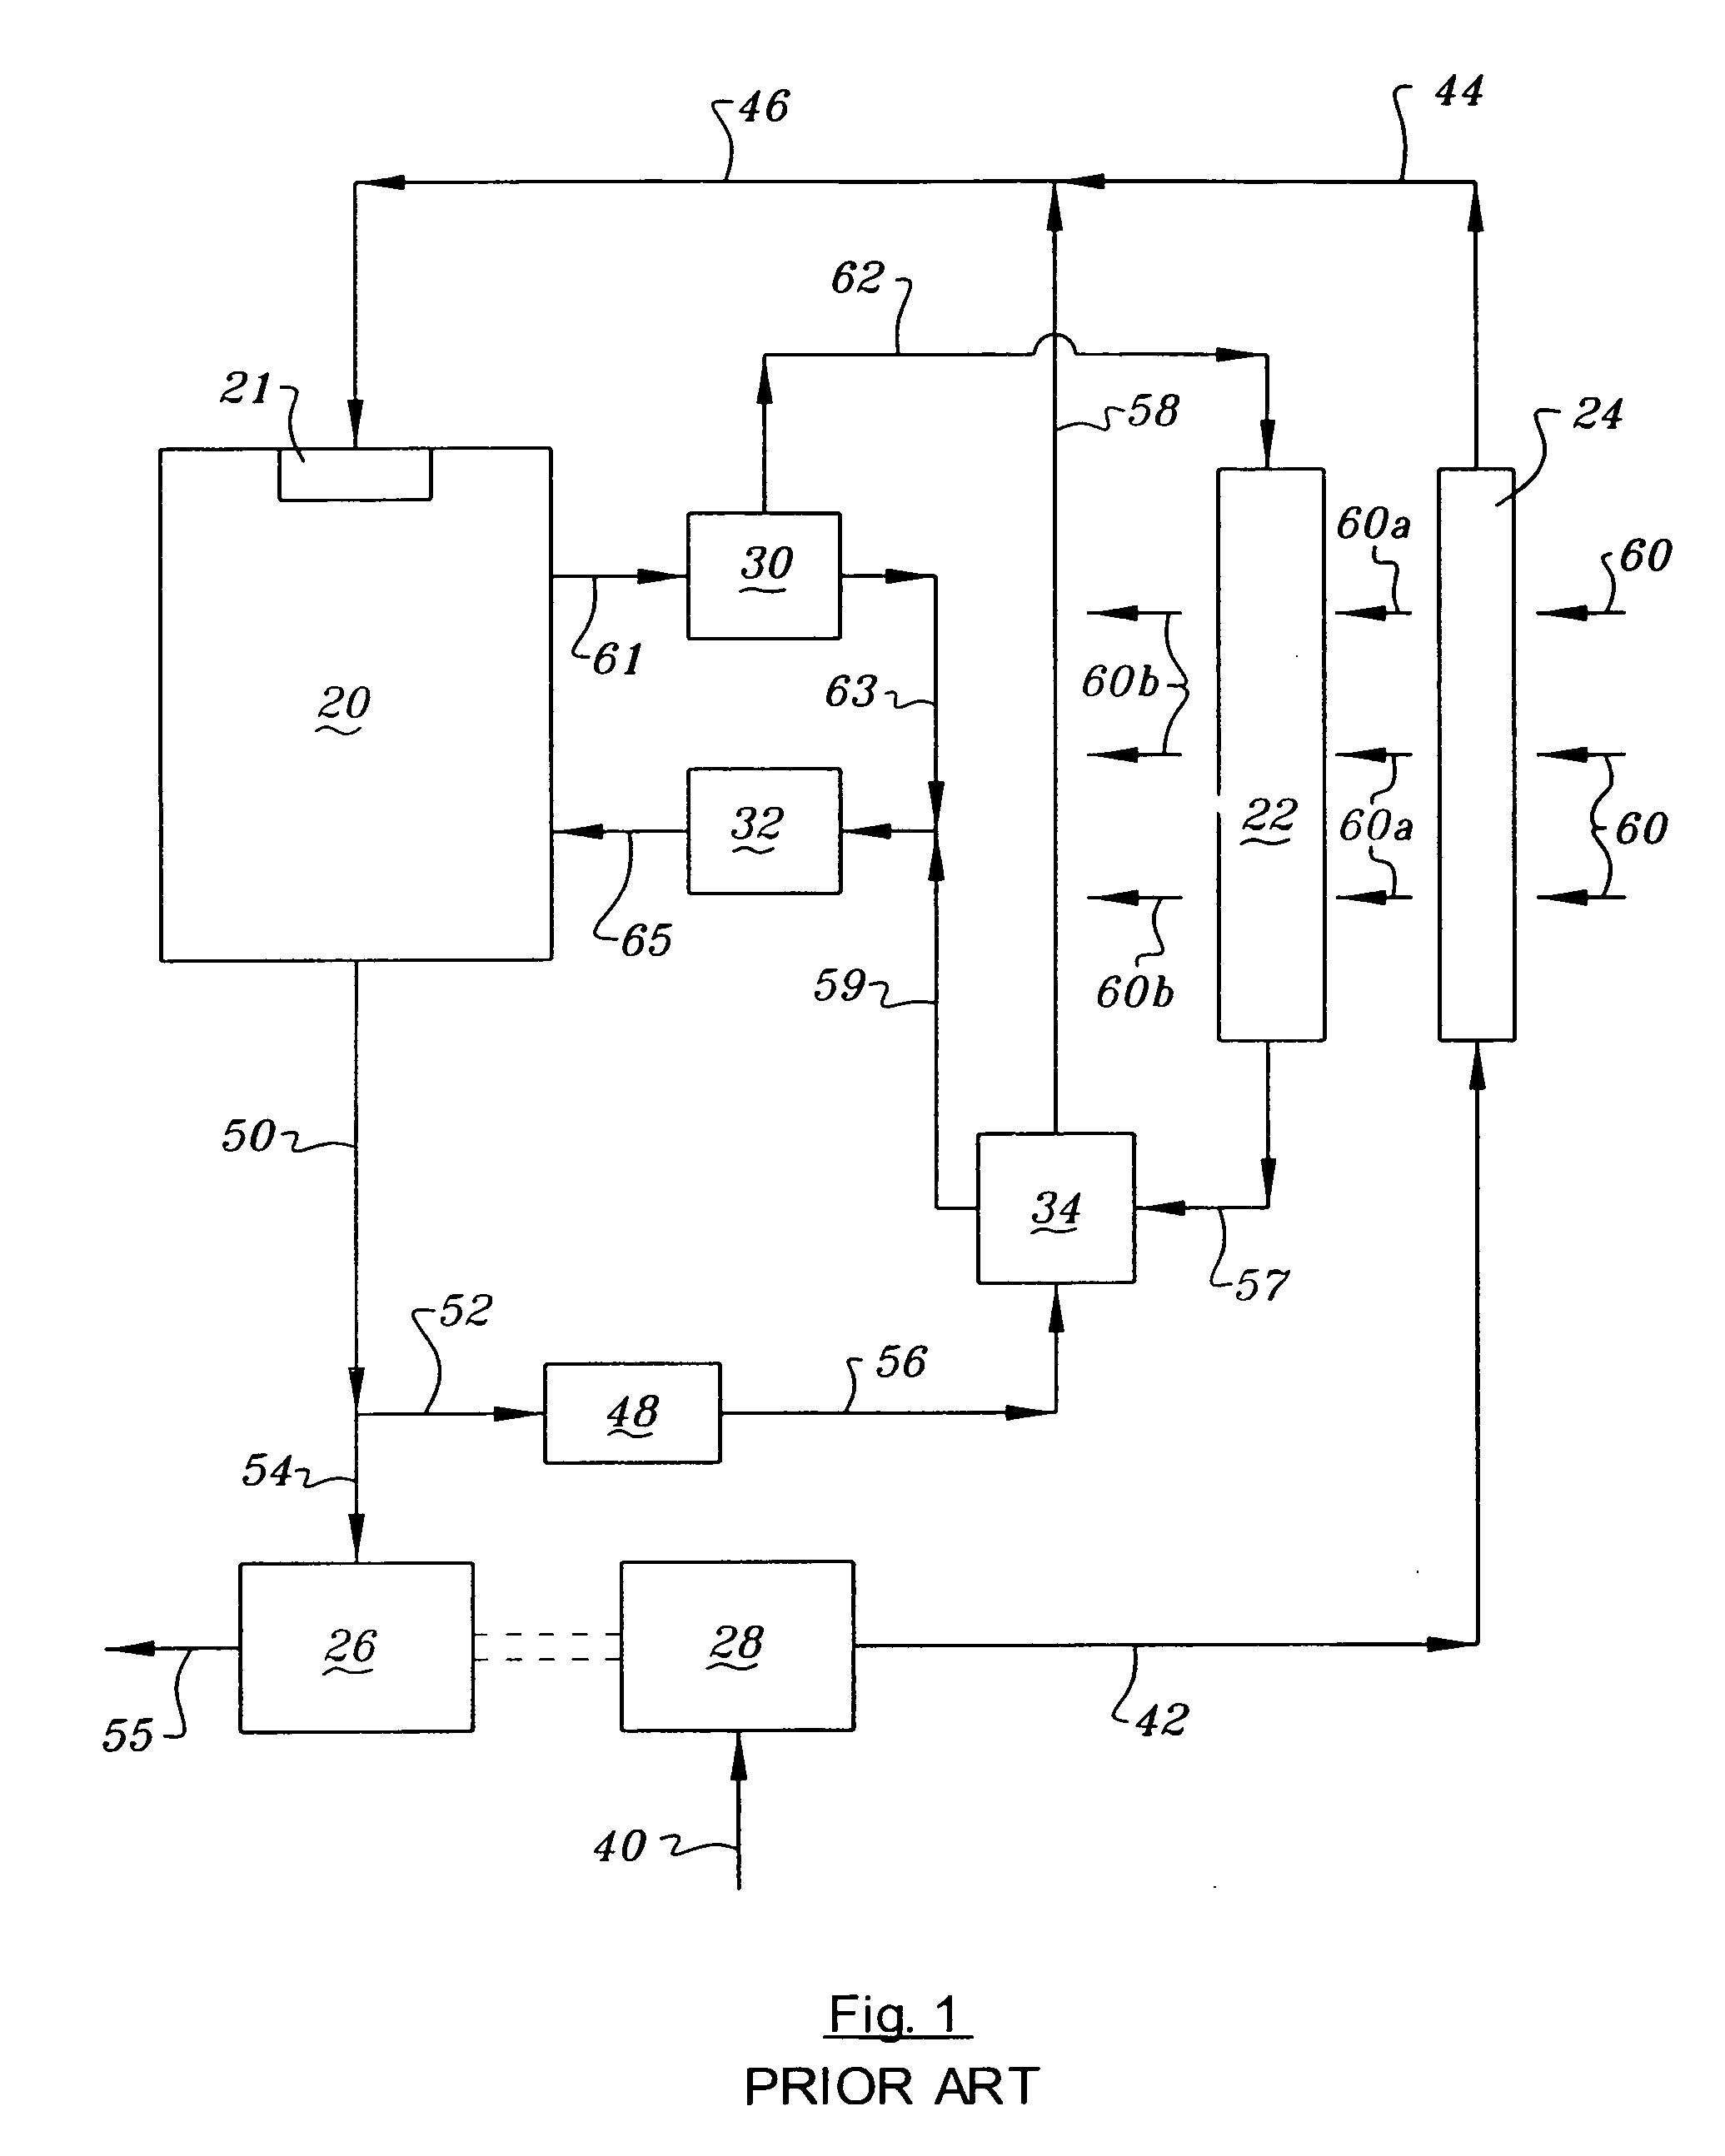 Method for cooling an internal combustion engine having exhaust gas recirculation and charge air cooling